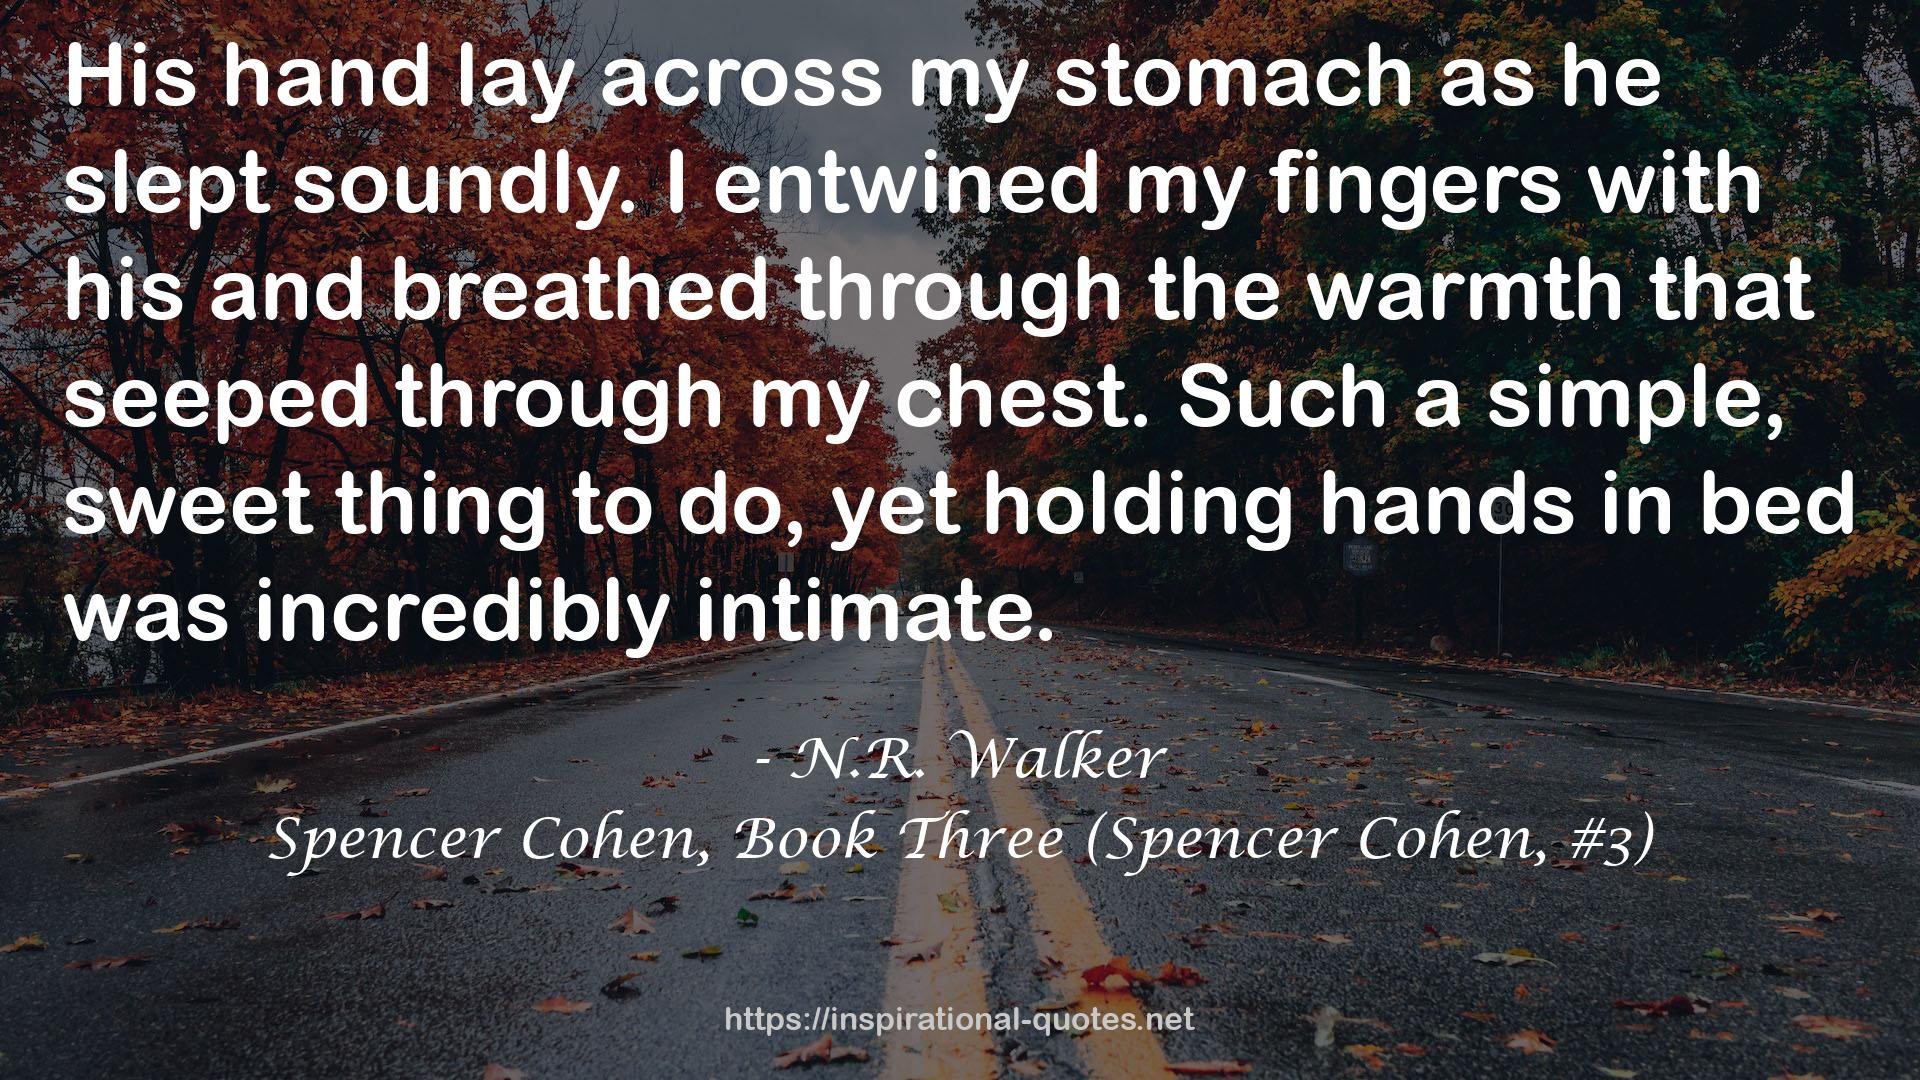 Spencer Cohen, Book Three (Spencer Cohen, #3) QUOTES